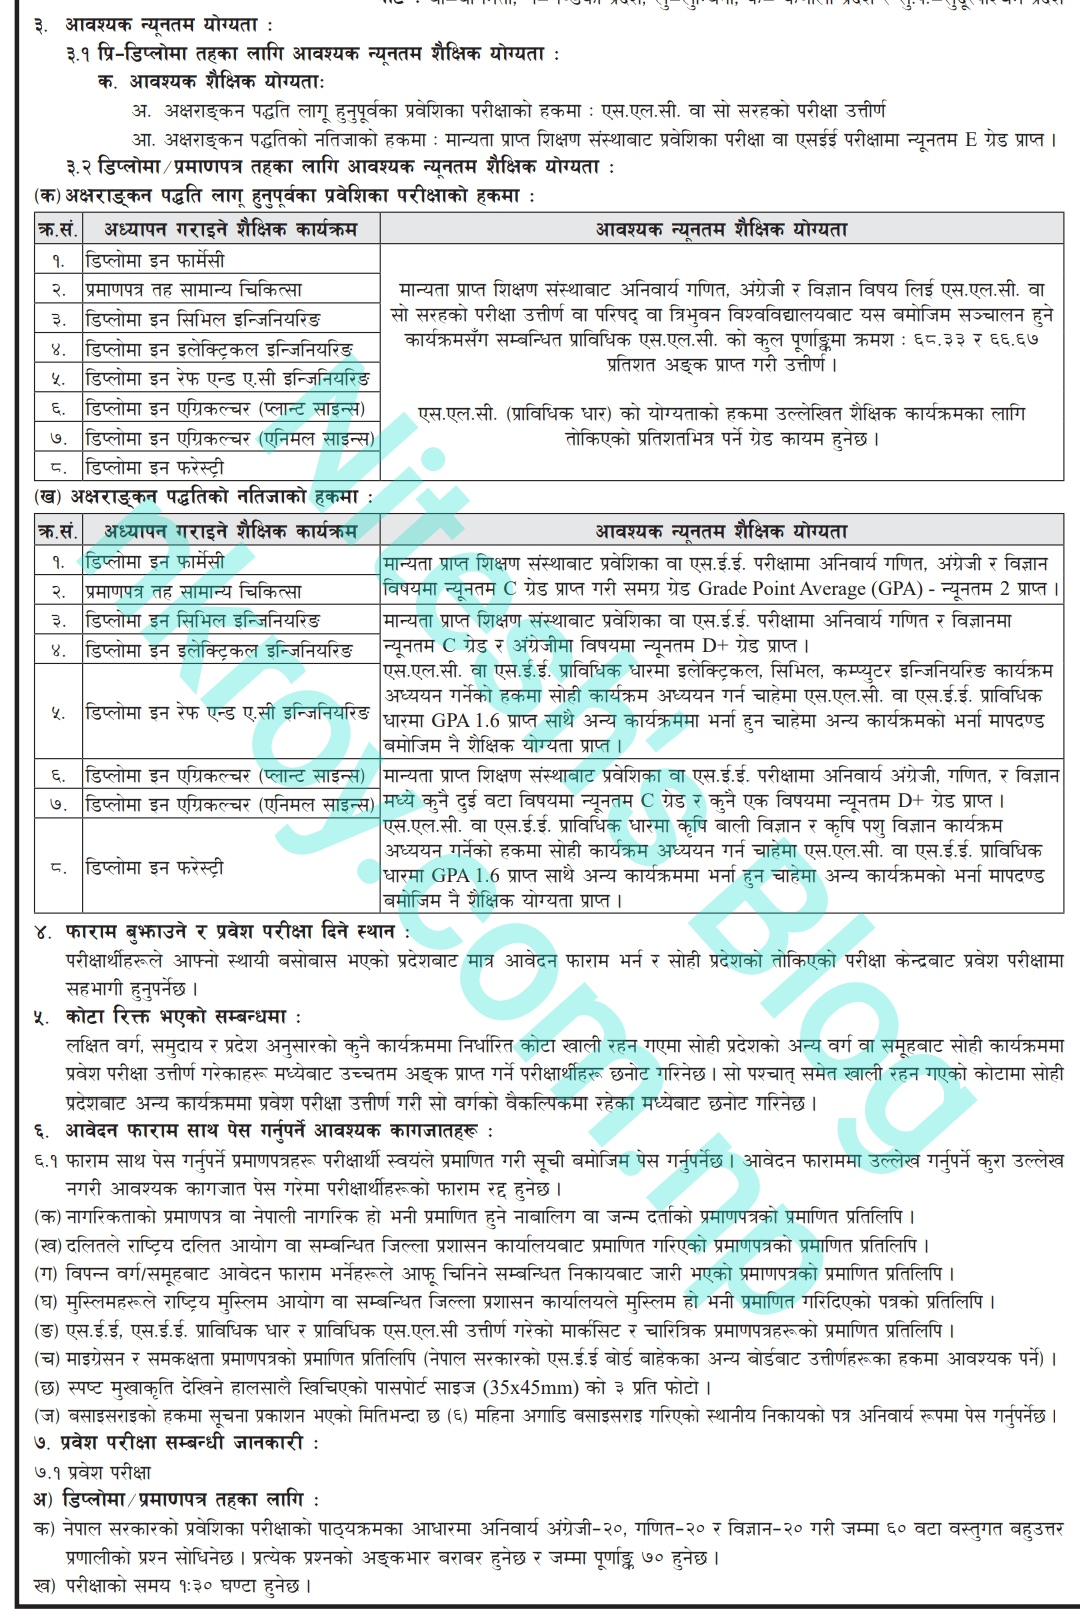 Required Minimum Qualification and Other Informations for CTEVT Special Scholarship Program